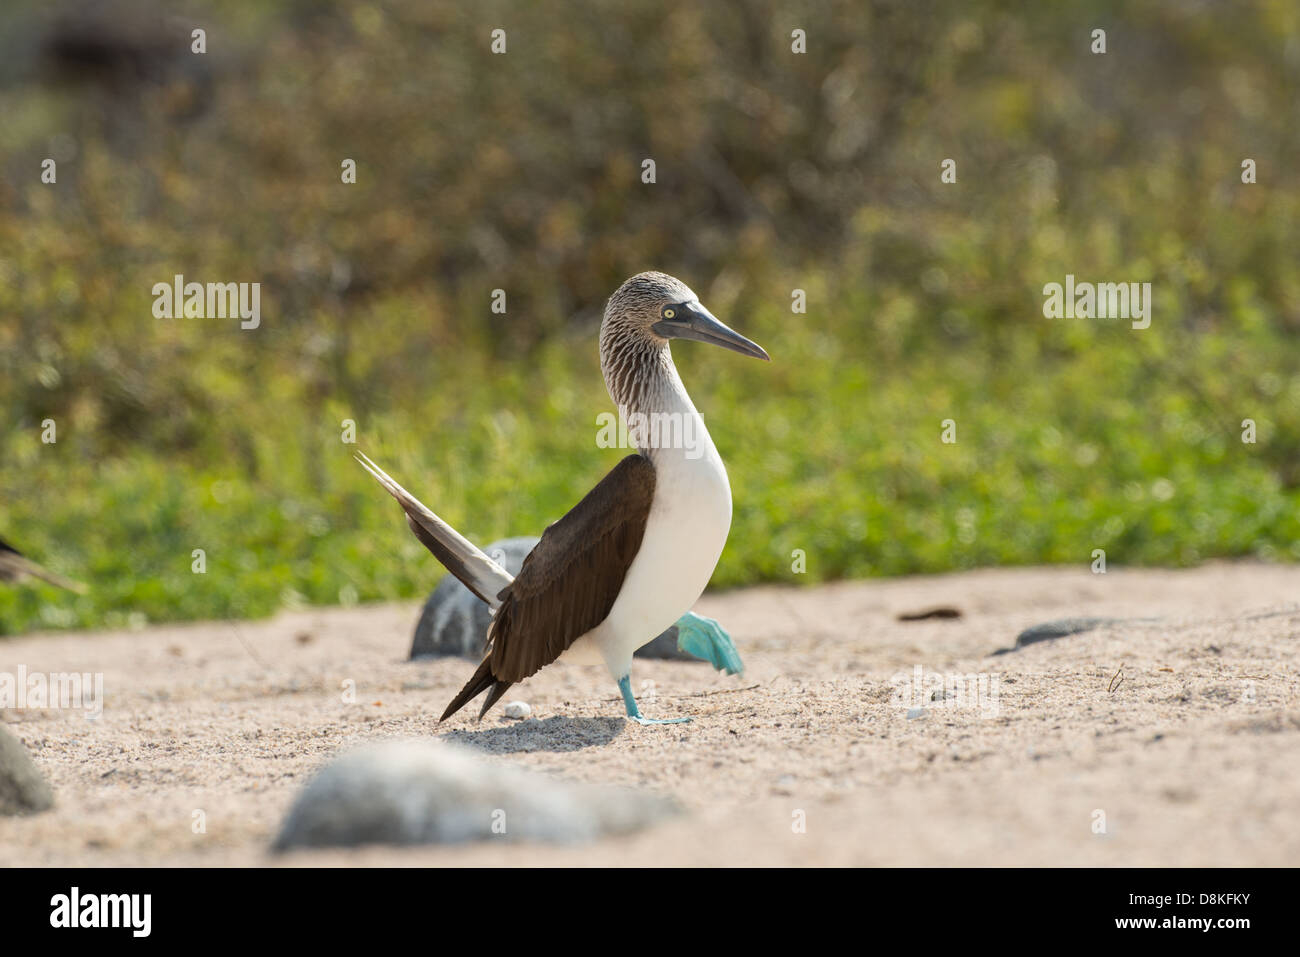 Stock photo of the breeding display of a blue footed booby, North Seymour Island, Galapagos Stock Photo